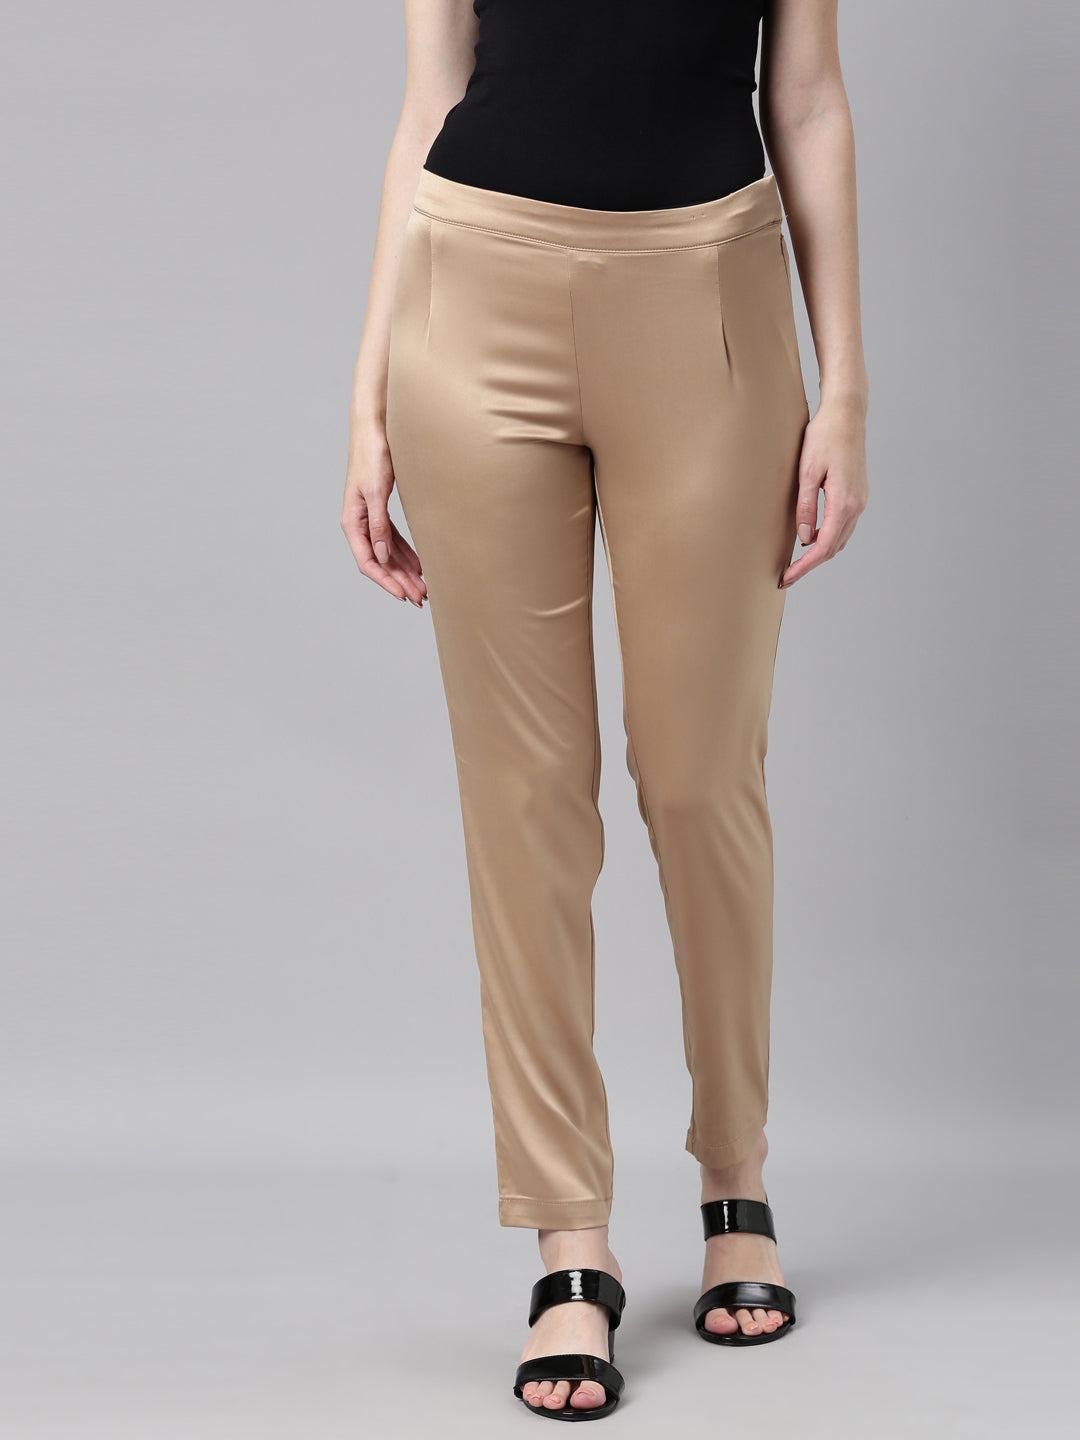 Go Colors Womens Pants in Allahabad - Dealers, Manufacturers & Suppliers -  Justdial